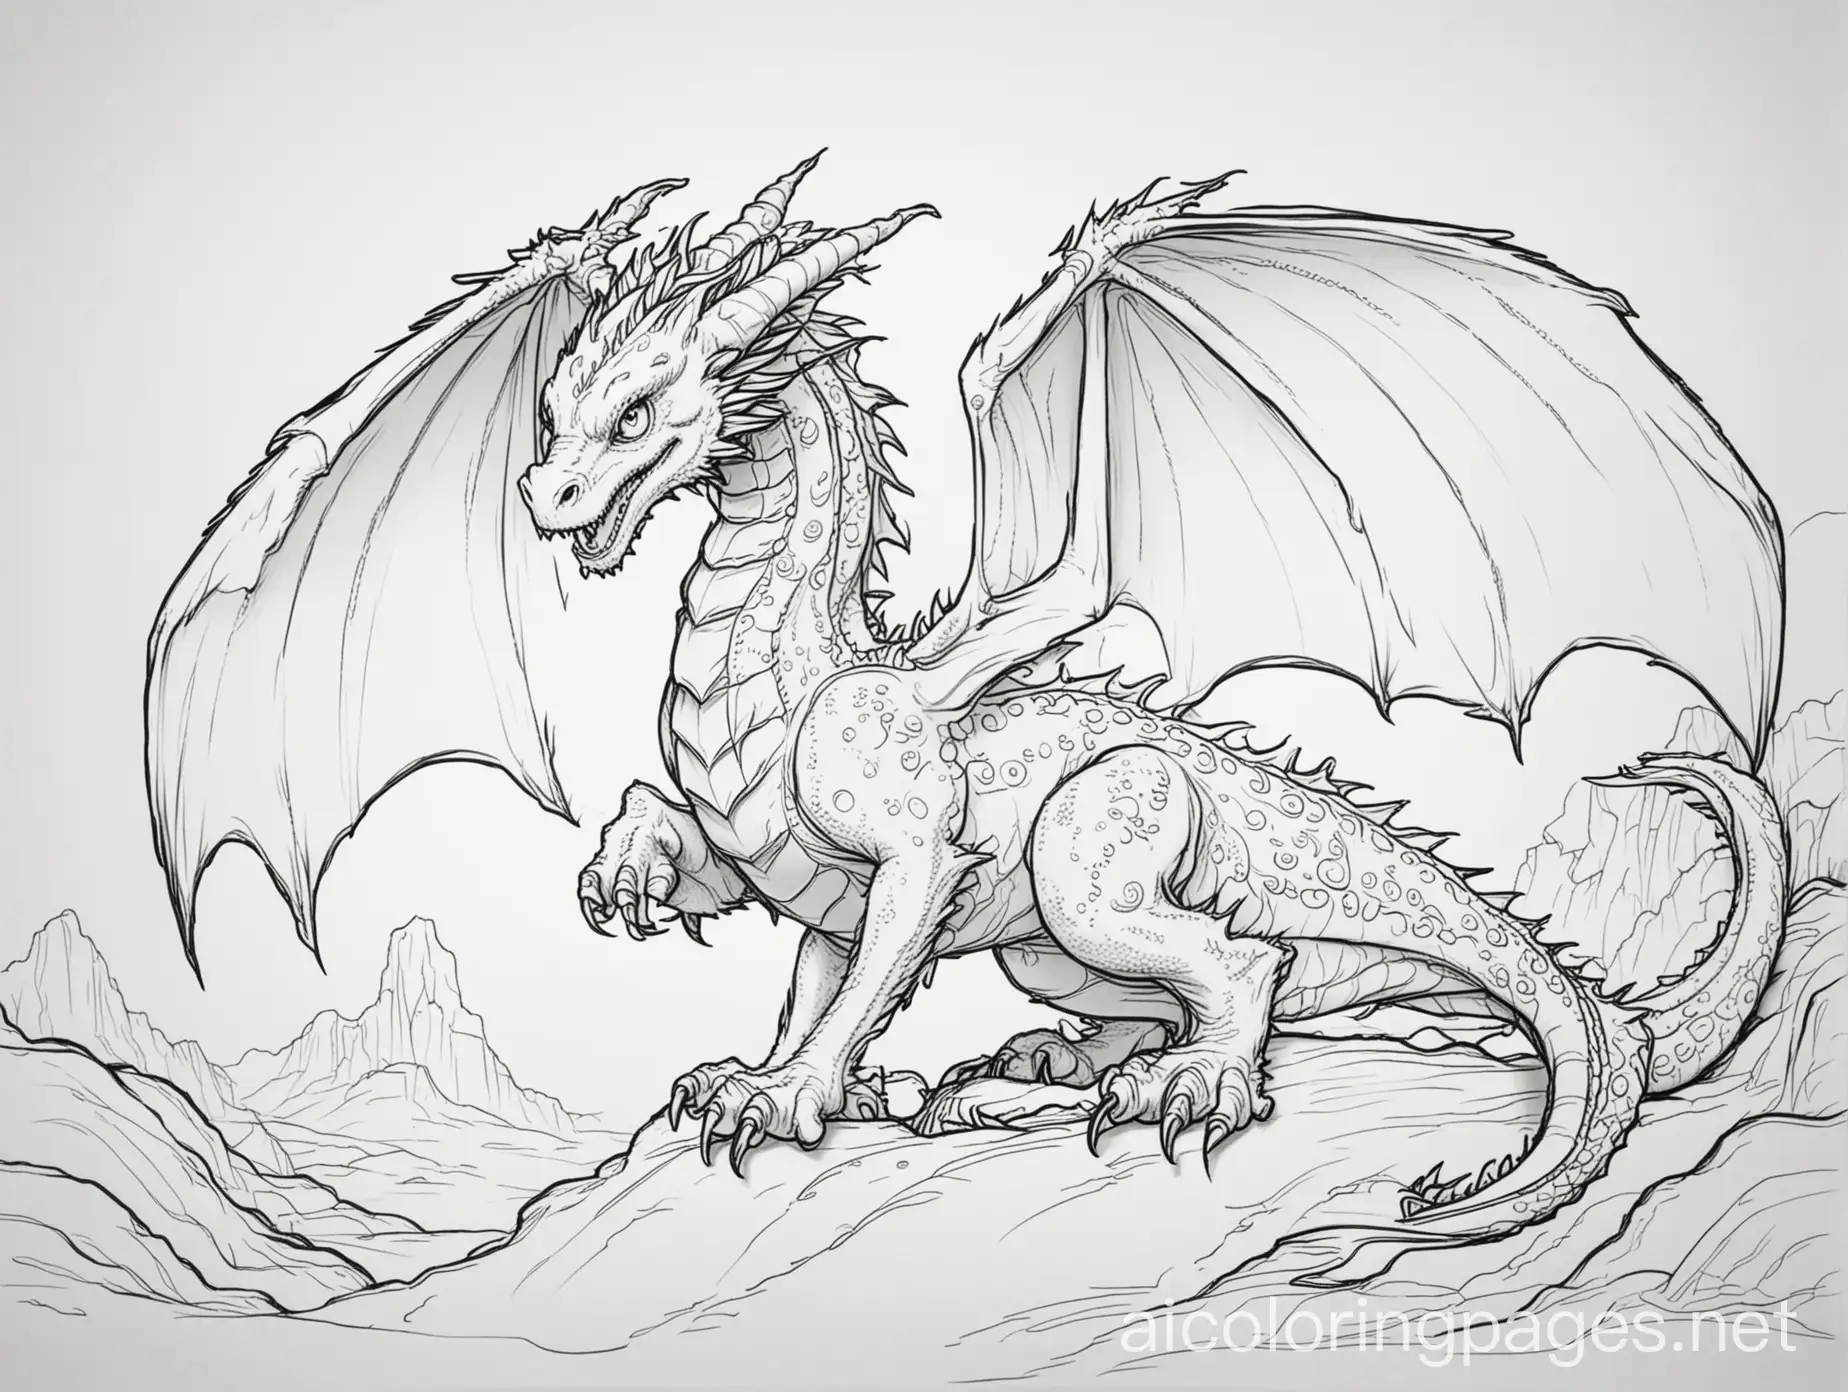 Dragon, Coloring Page, black and white, line art, white background, Simplicity, Ample White Space. The background of the coloring page is plain white to make it easy for young children to color within the lines. The outlines of all the subjects are easy to distinguish, making it simple for kids to color without too much difficulty